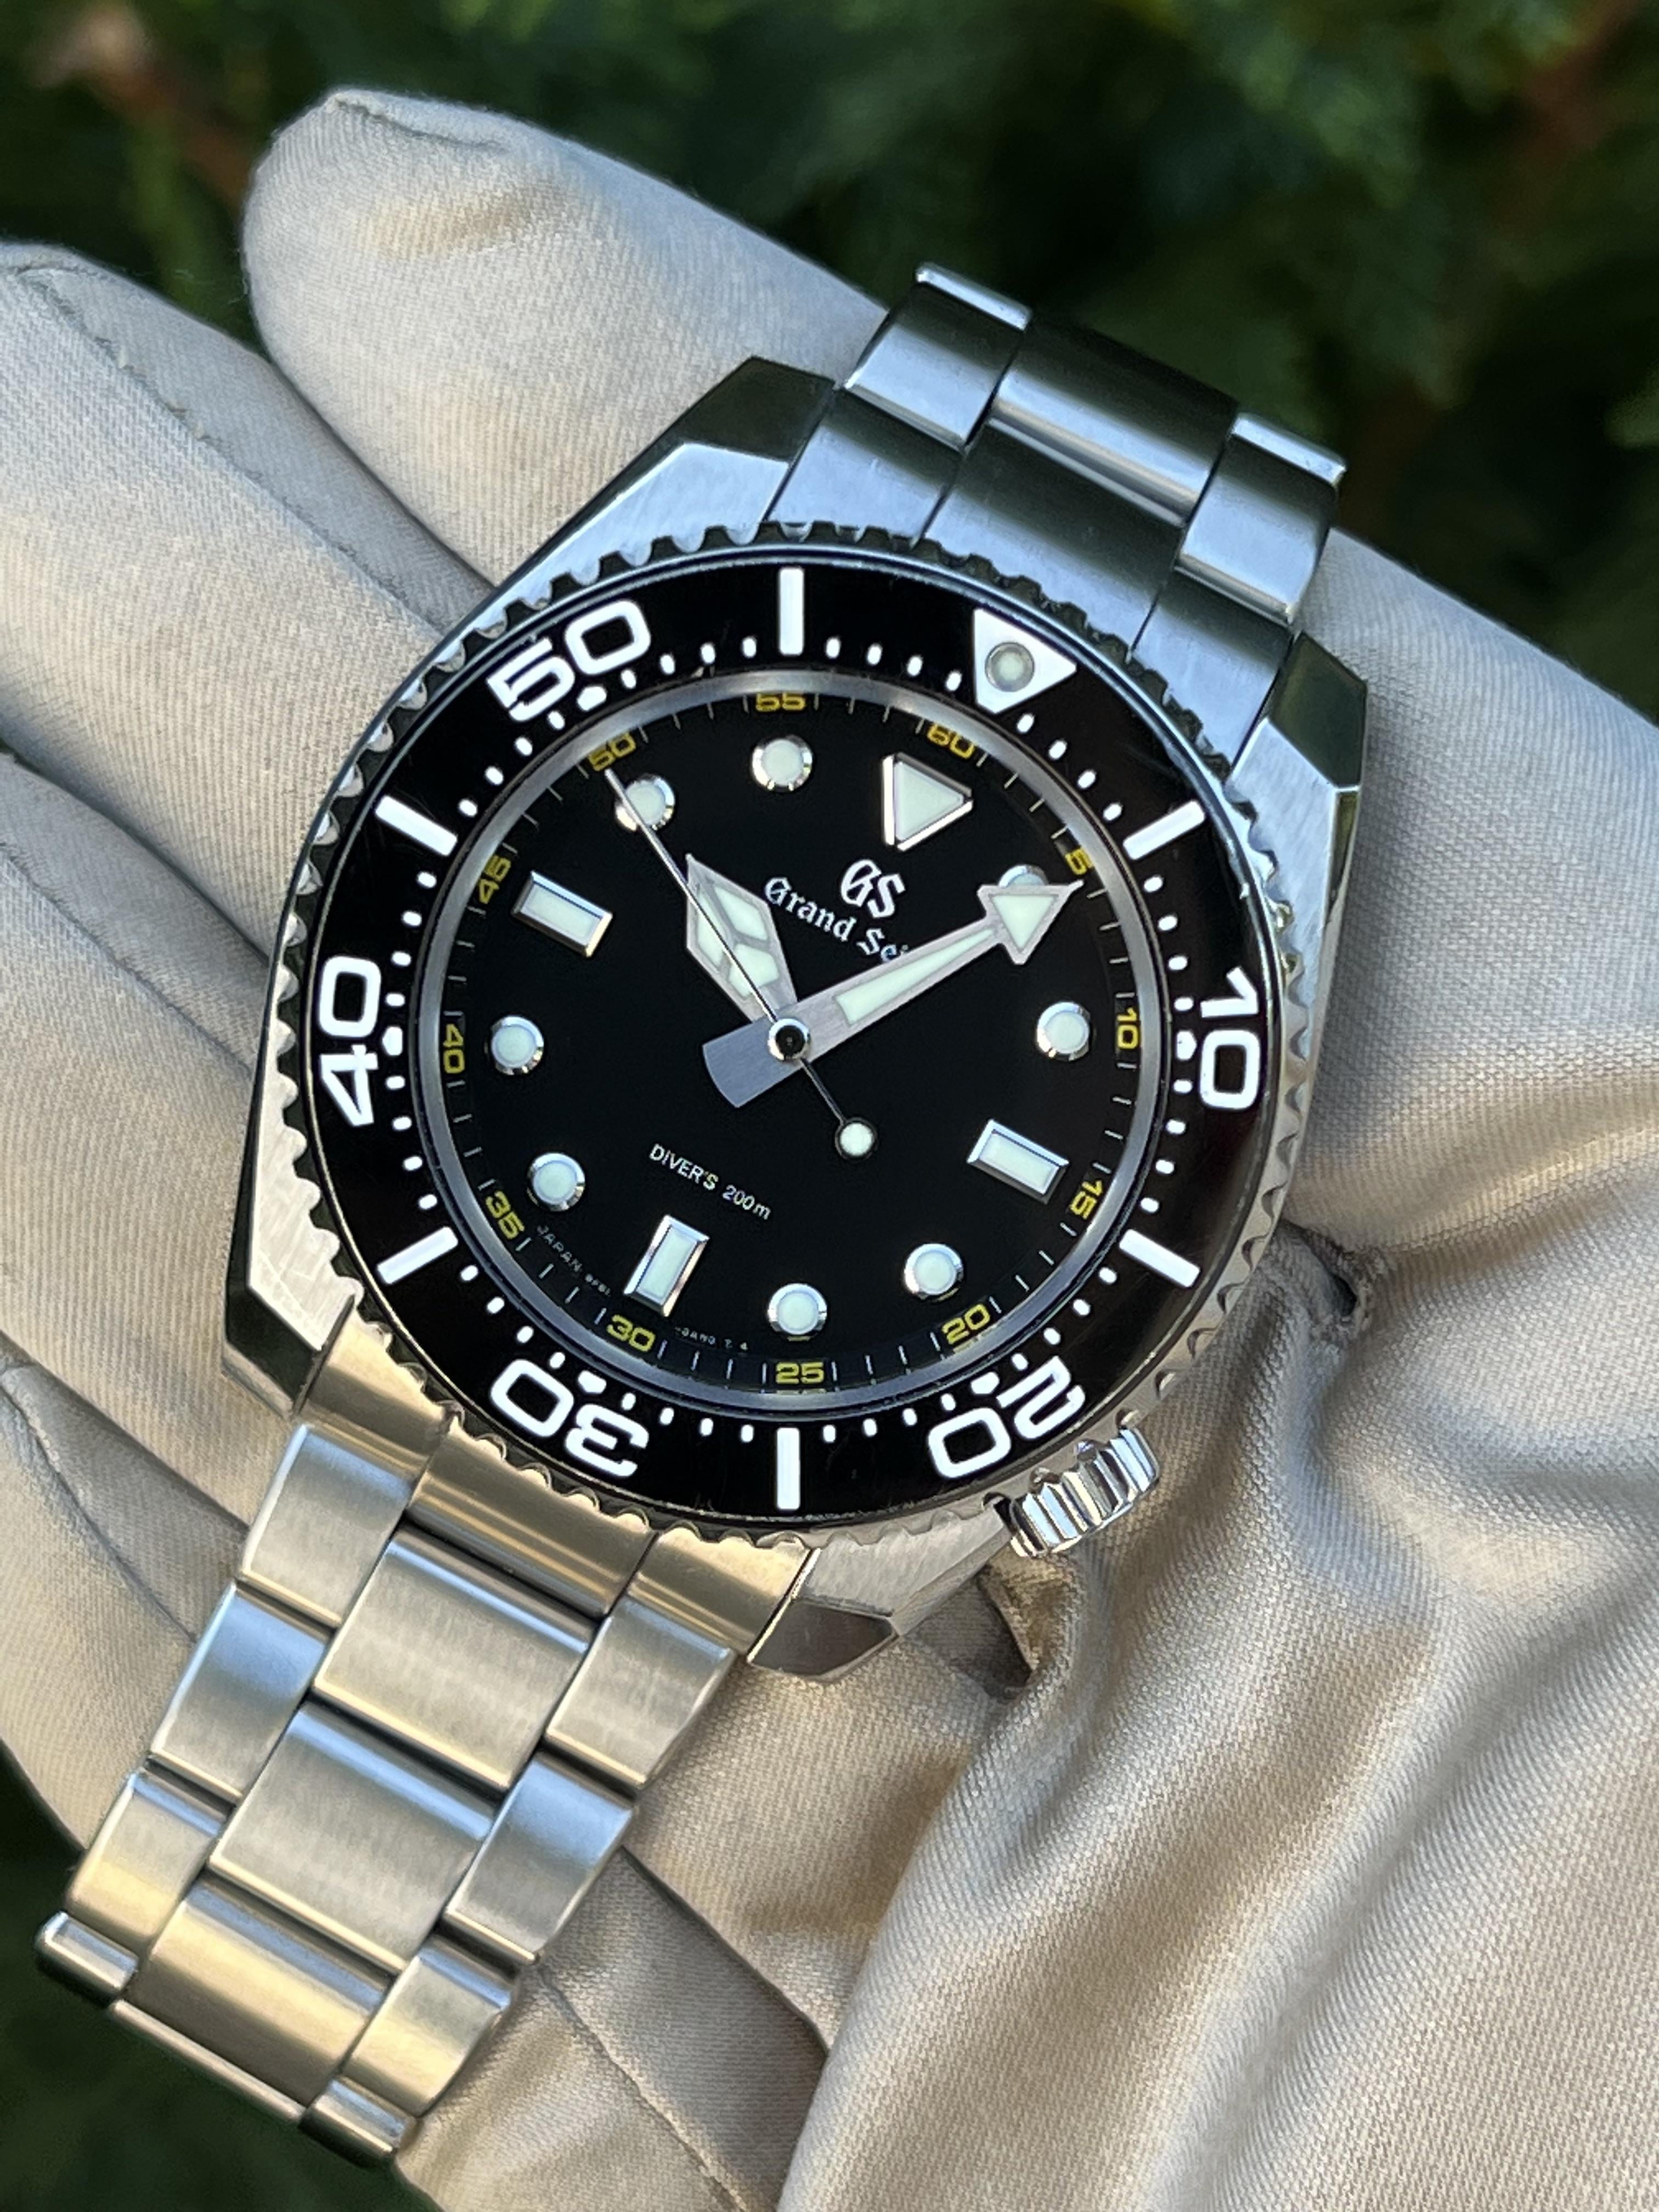 WTS] Grand Seiko Diver Reference SBGX335 Black Dial Bu0026P | WatchCharts  Marketplace